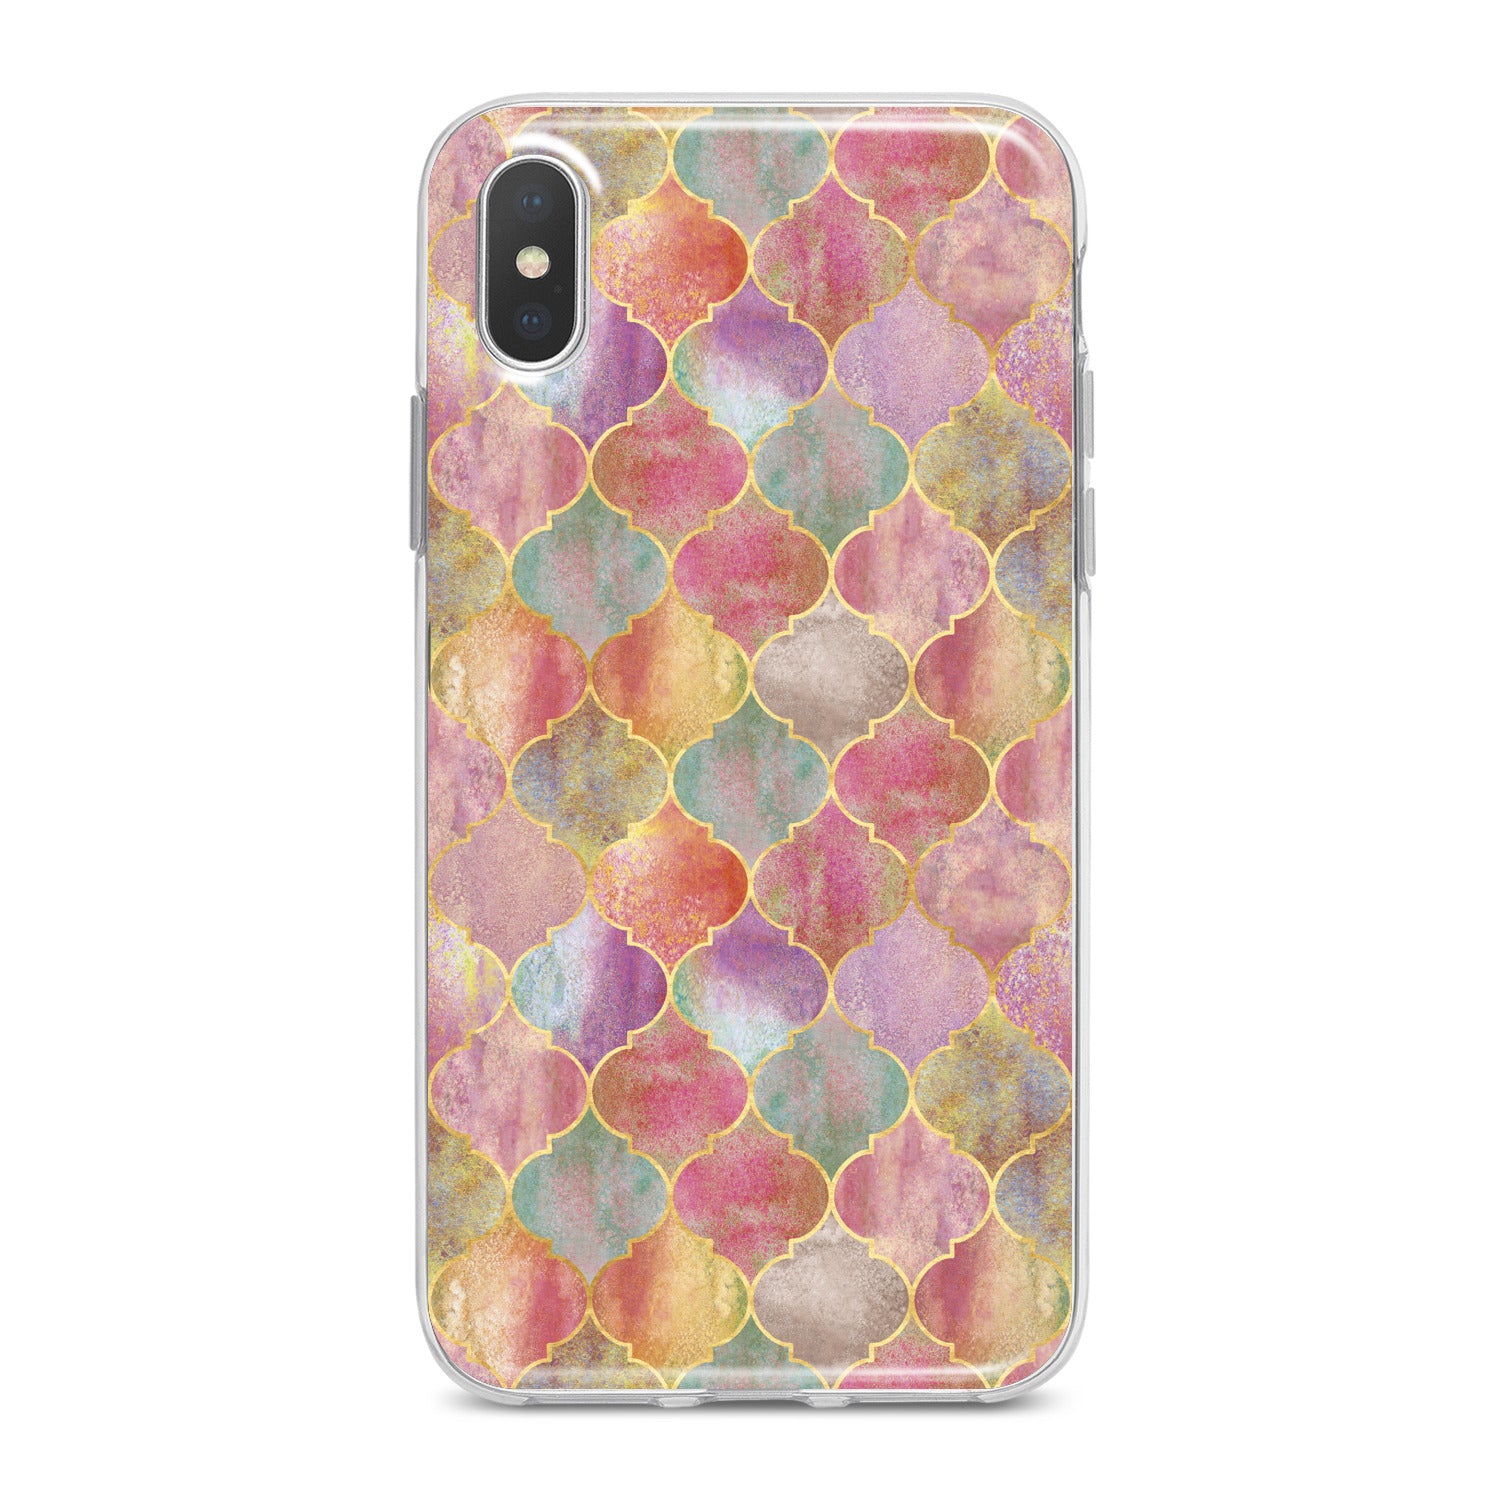 Lex Altern Decorative Art Phone Case for your iPhone & Android phone.